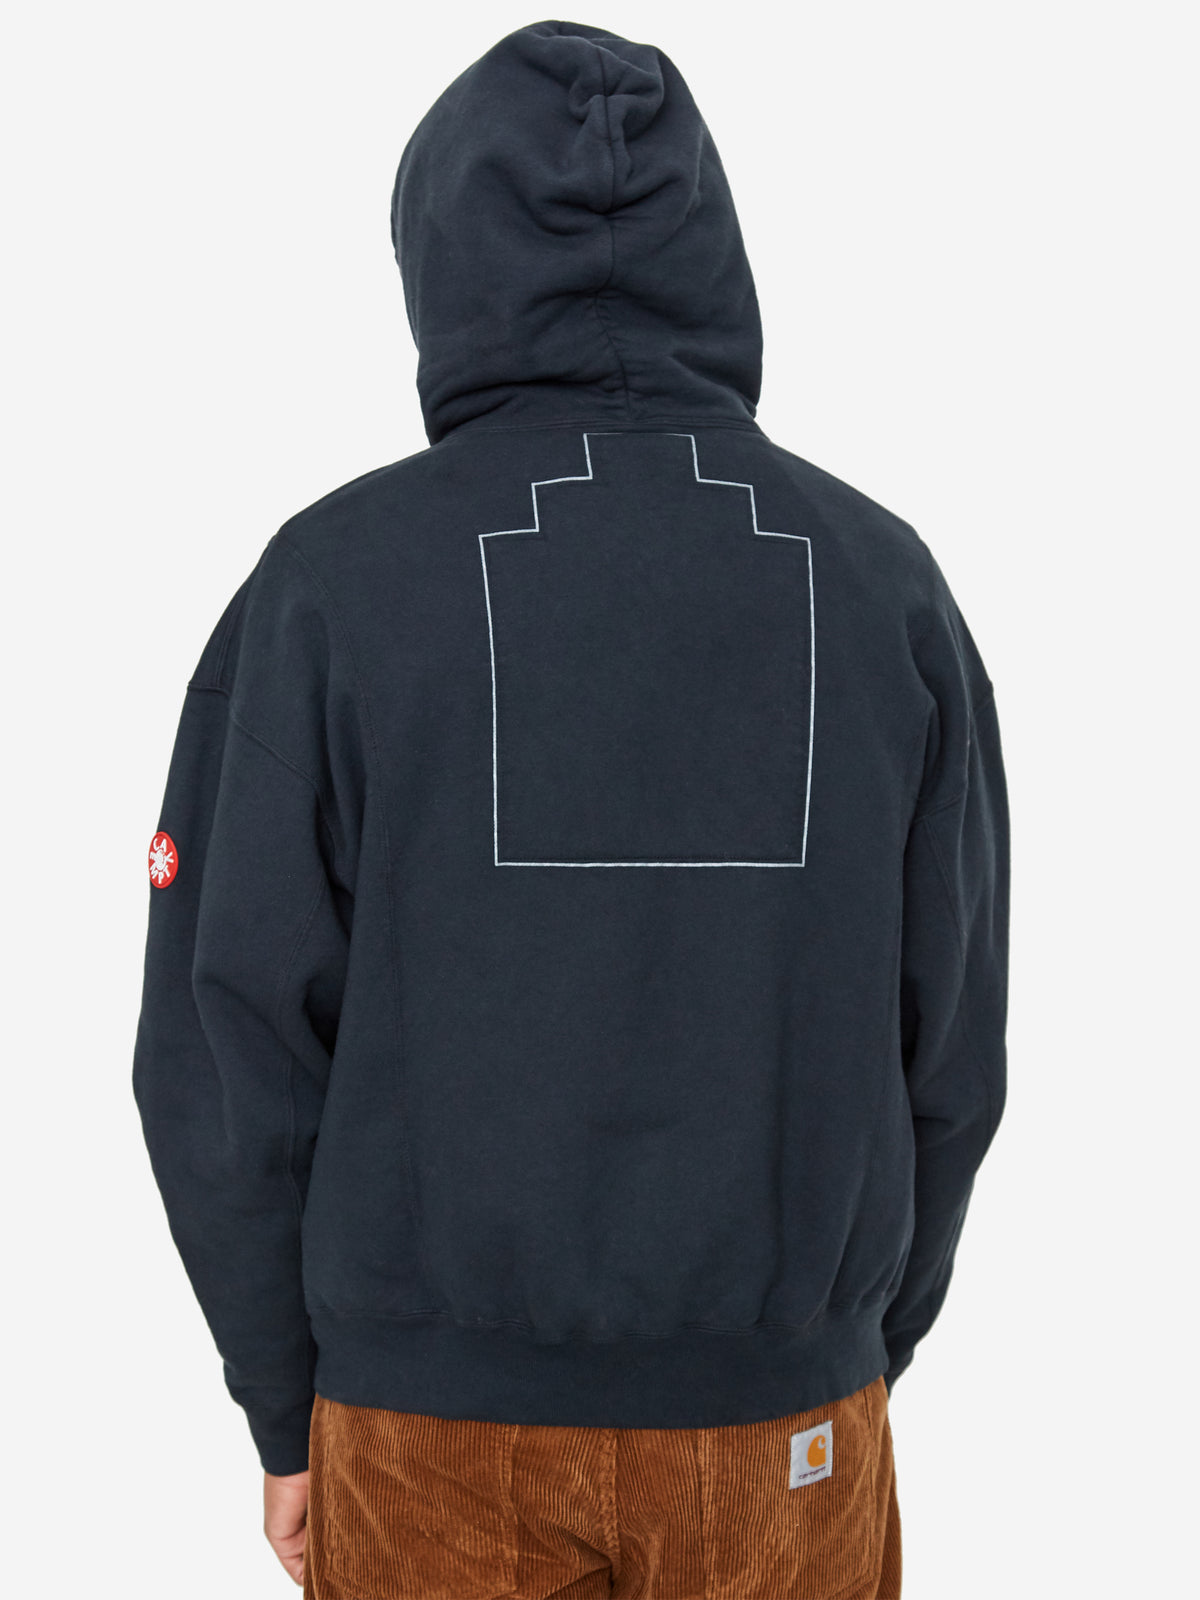 The Latest Collection is Available Now at C.E Cav Empt Overdye Cut